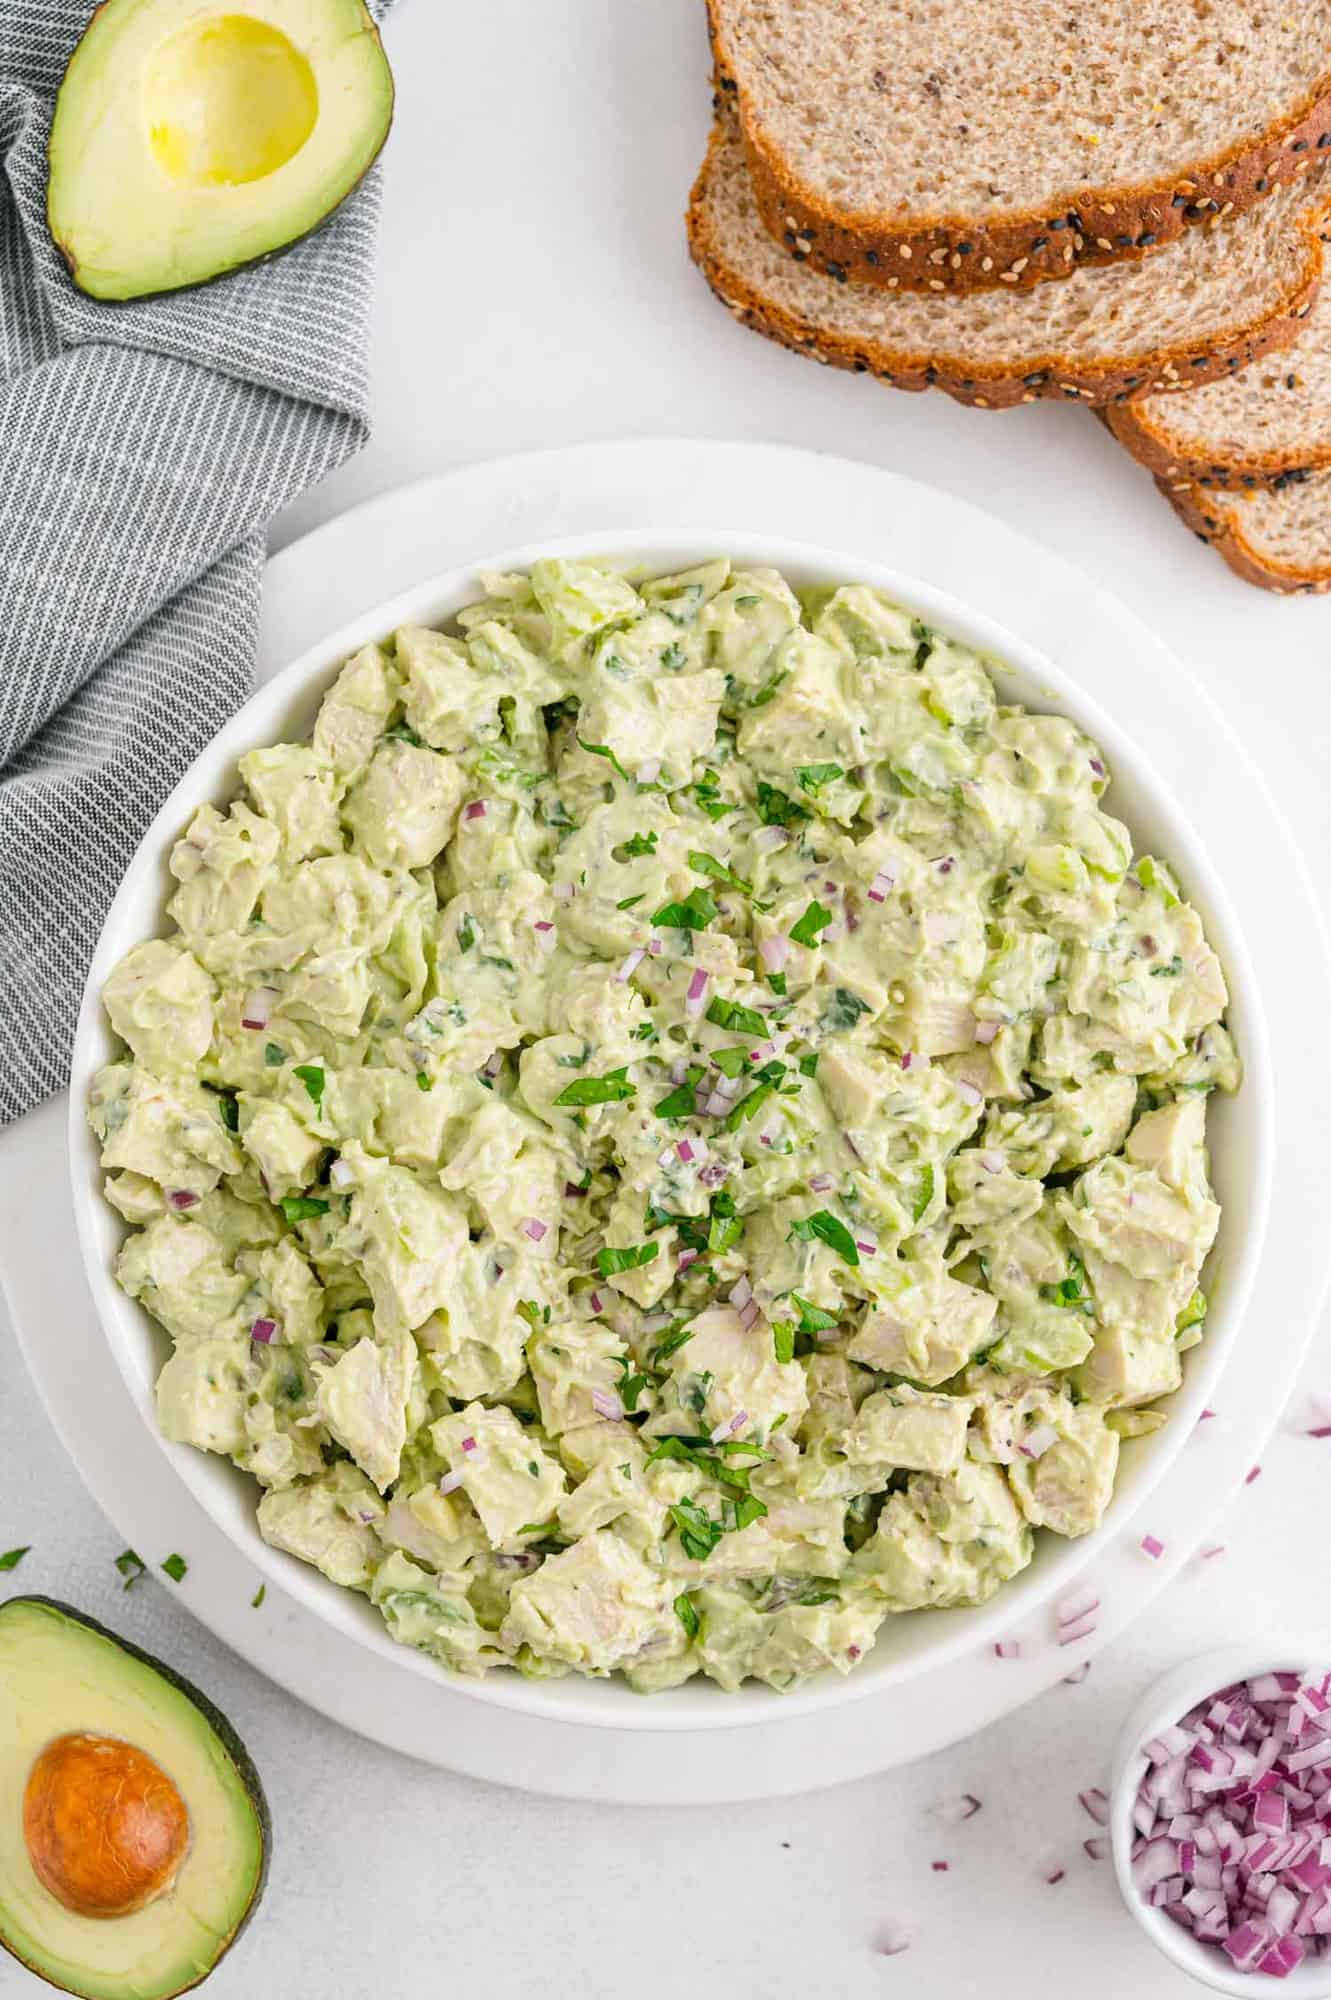 Avocado chicken salad in a bowl, surrounded by bread, avocados, onion.